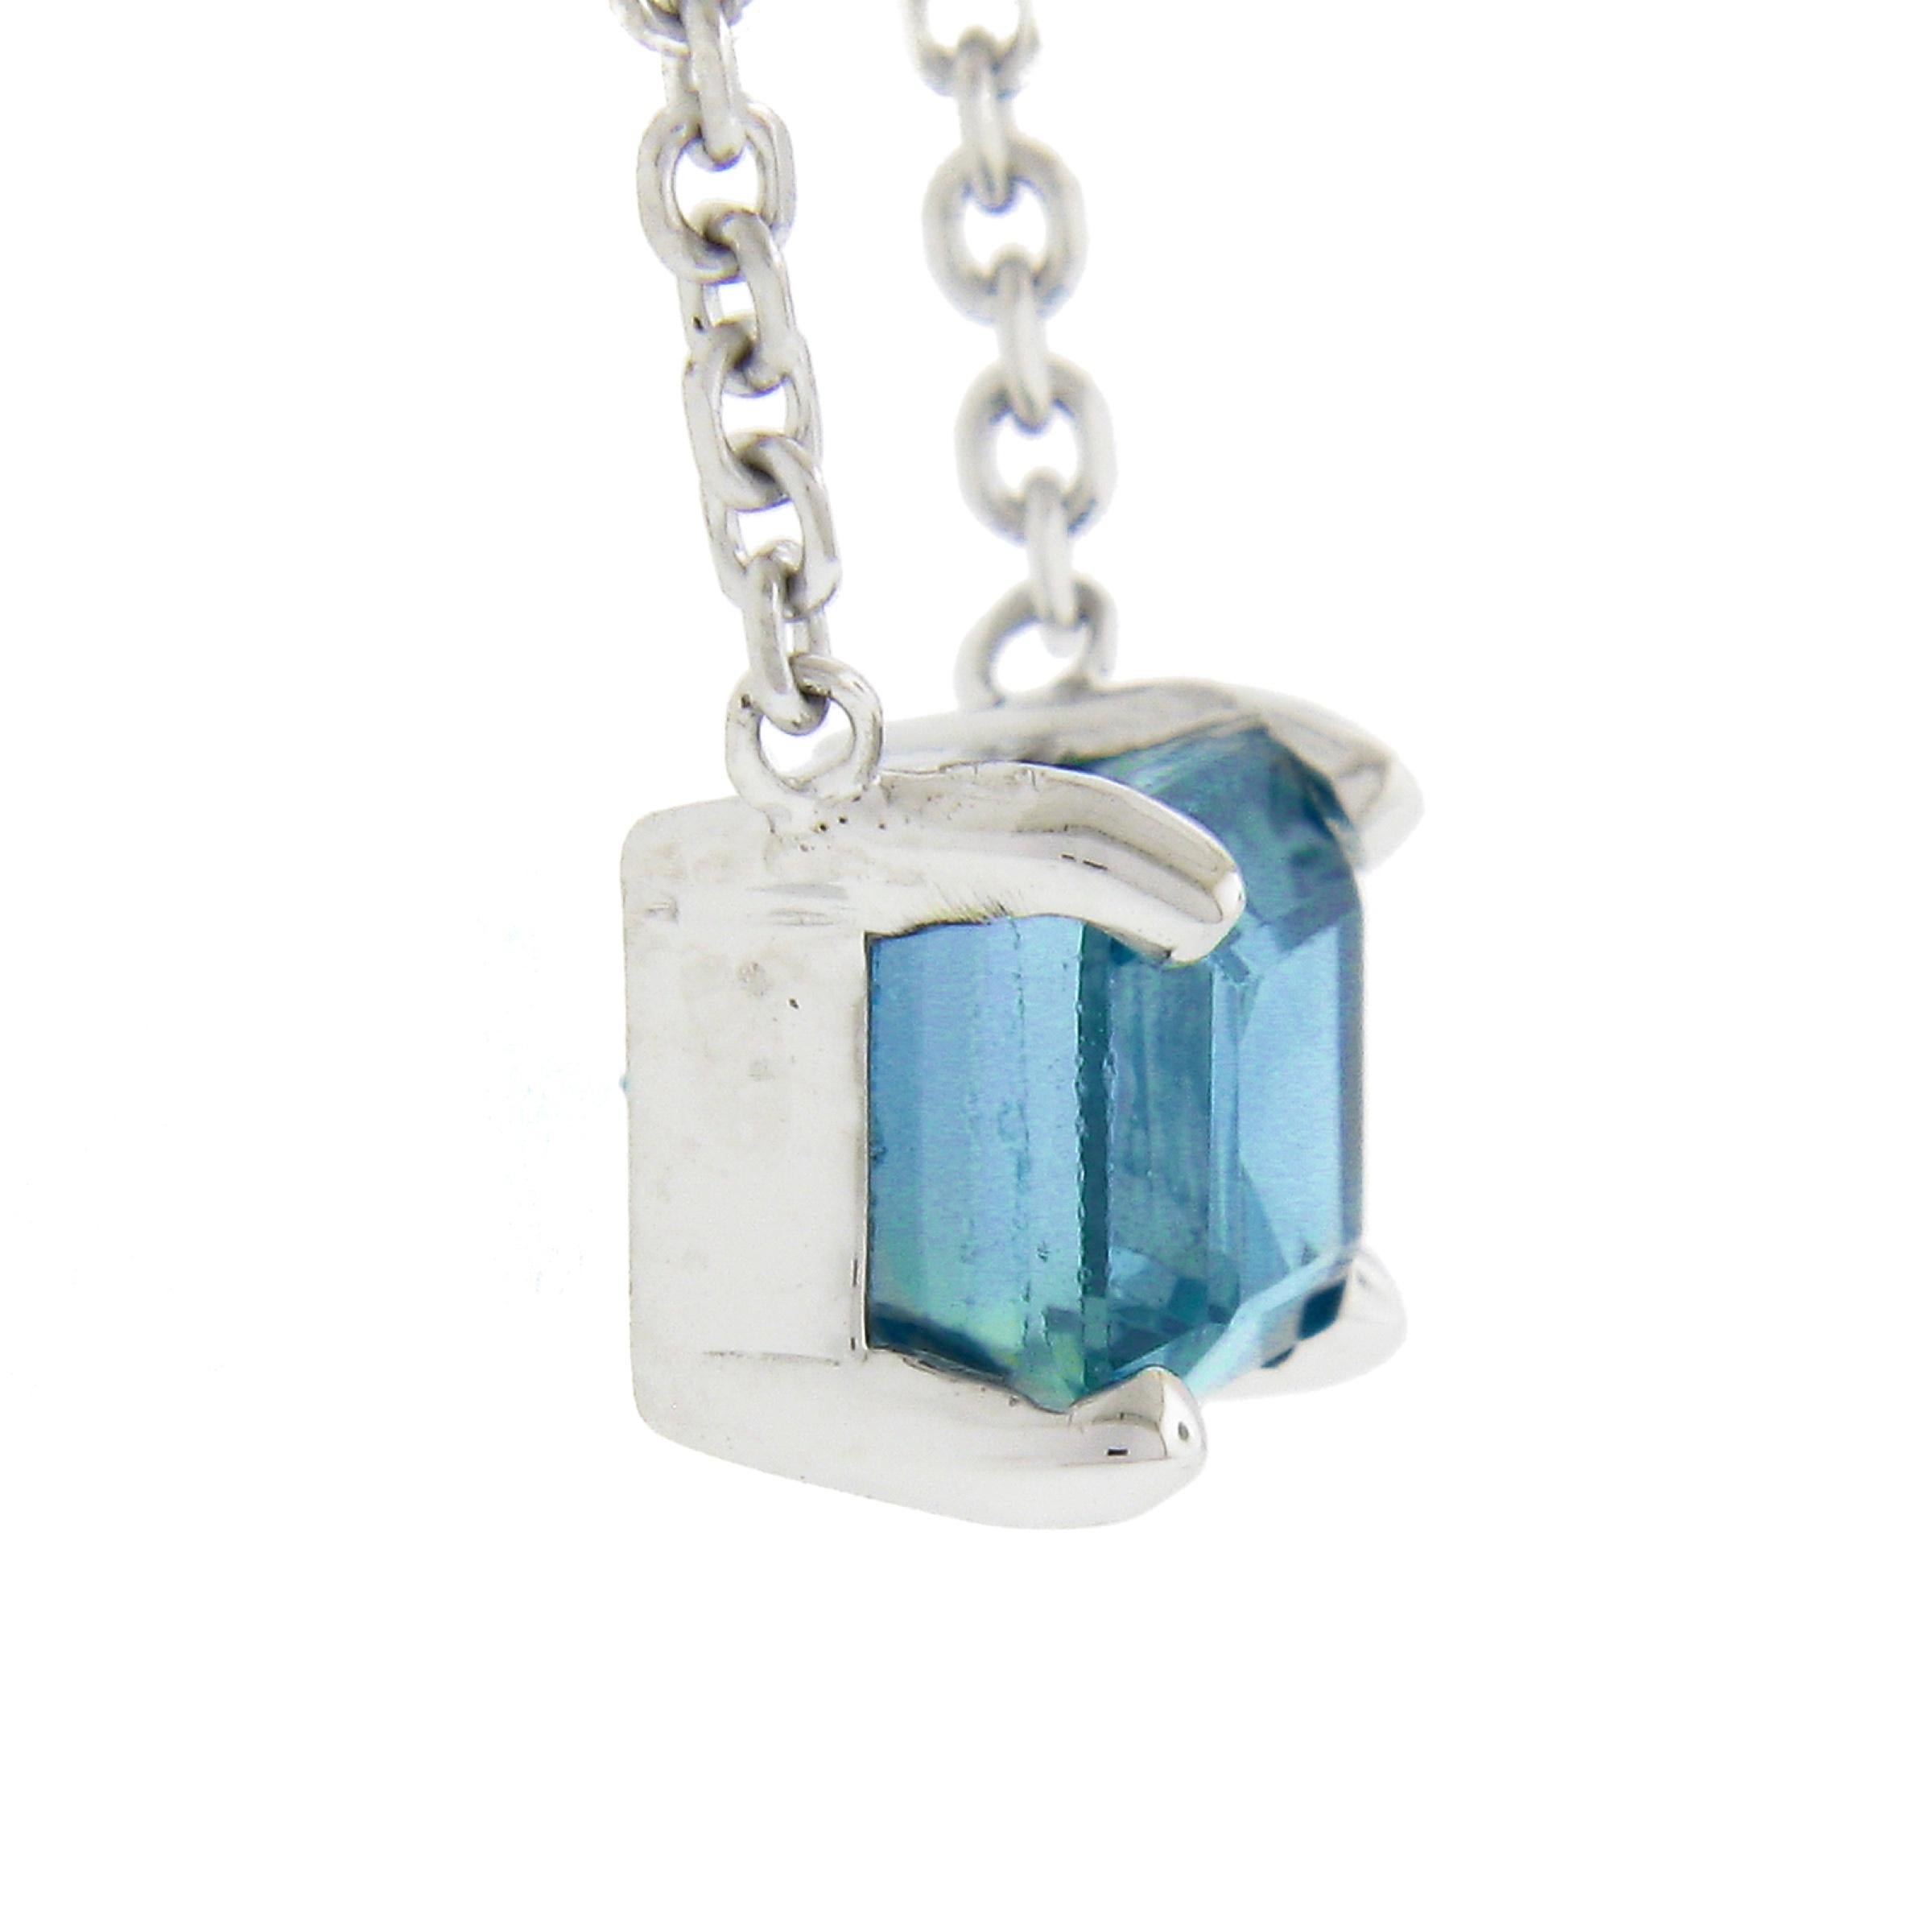 New 14K White Gold Rectangular Cut Prong Blue Zircon Solitaire Pendant & Chain In New Condition For Sale In Montclair, NJ